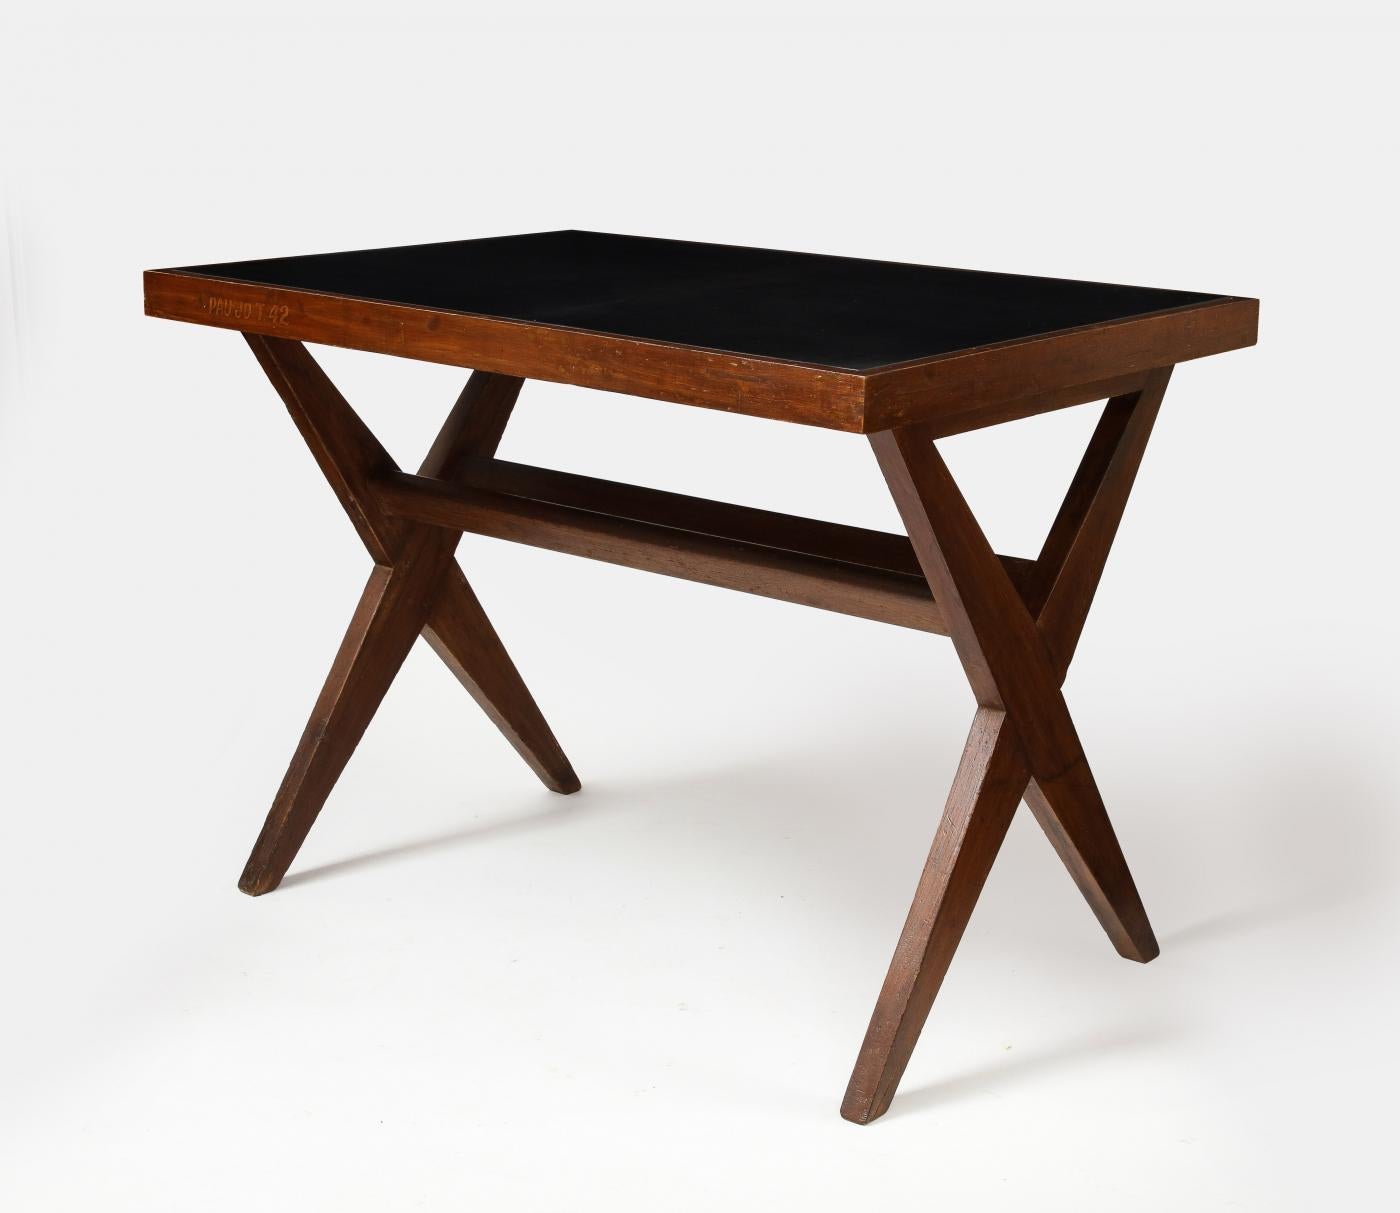 Leather and Teak Desk by Pierre Jeanneret, Chandigarh, India

Beautiful patinated desk by PIerre Jeanneret. The full-grained leather is beautifully dyed and ties seamlessly with the warmth of the teak.

